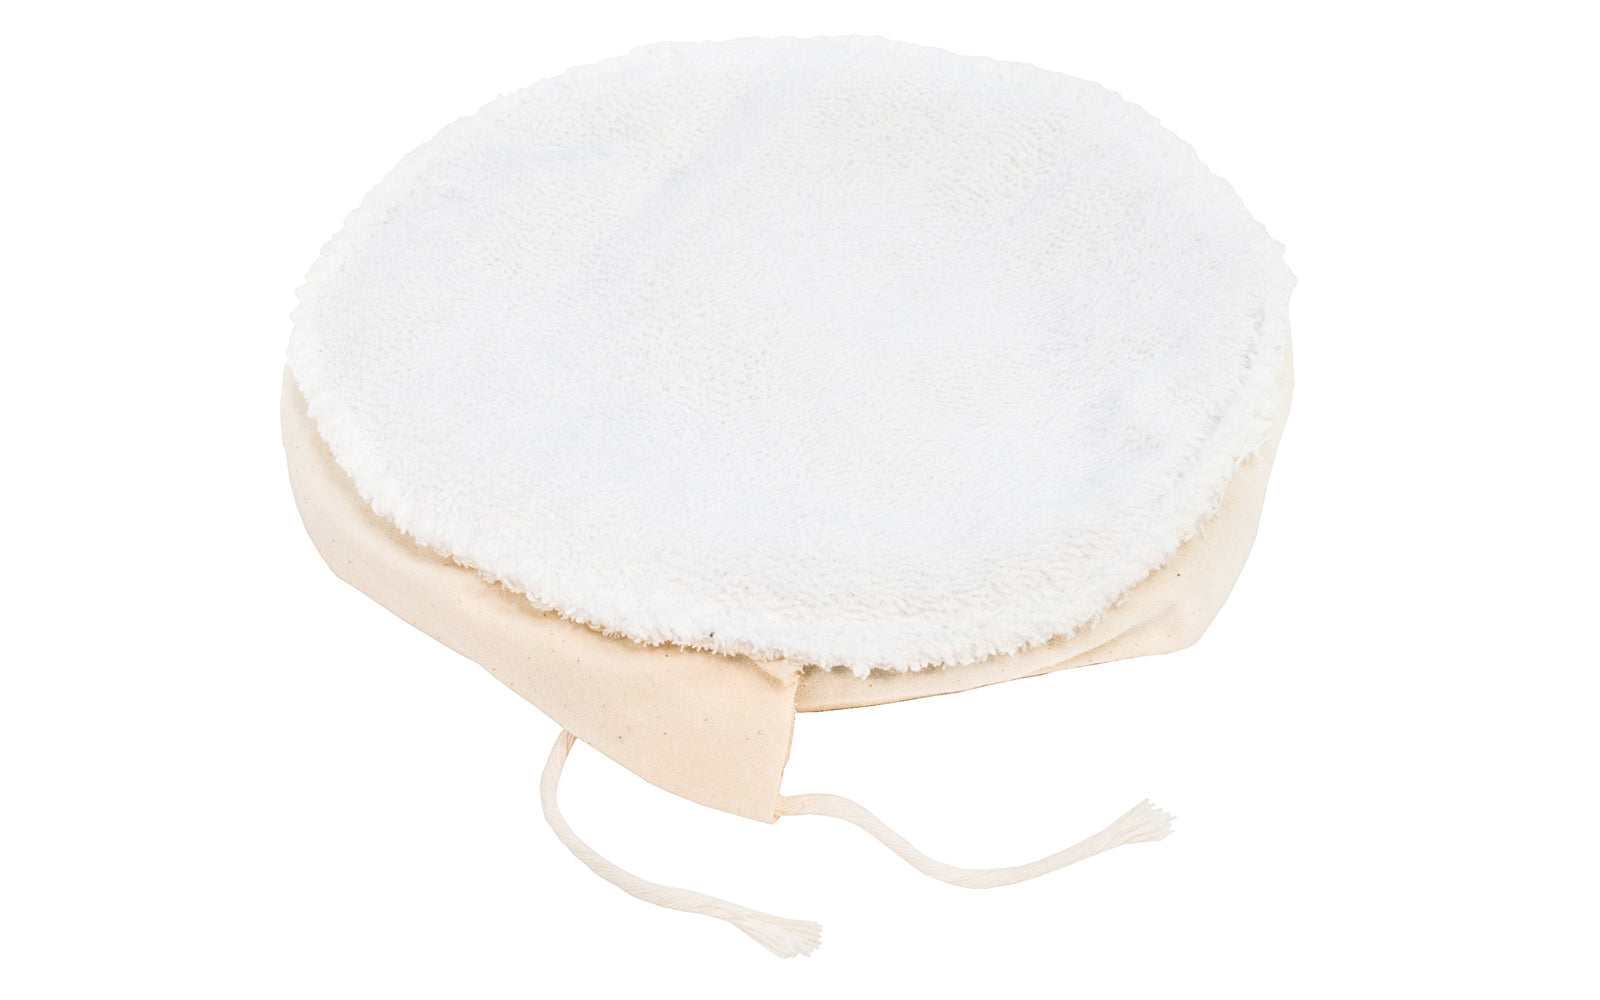 7-8" Reversible Terry Cloth & Foam Tie-On Bonnet - quality USA-made Terry Cloth & Foam reversible bonnet. The unique reversible construction allows for application & removal of wax with one pad. Elastic edge that holds the bonnet firmly in place. Size to fit - For 7 to 8" diameter. drawstring ties.  Made in the USA.